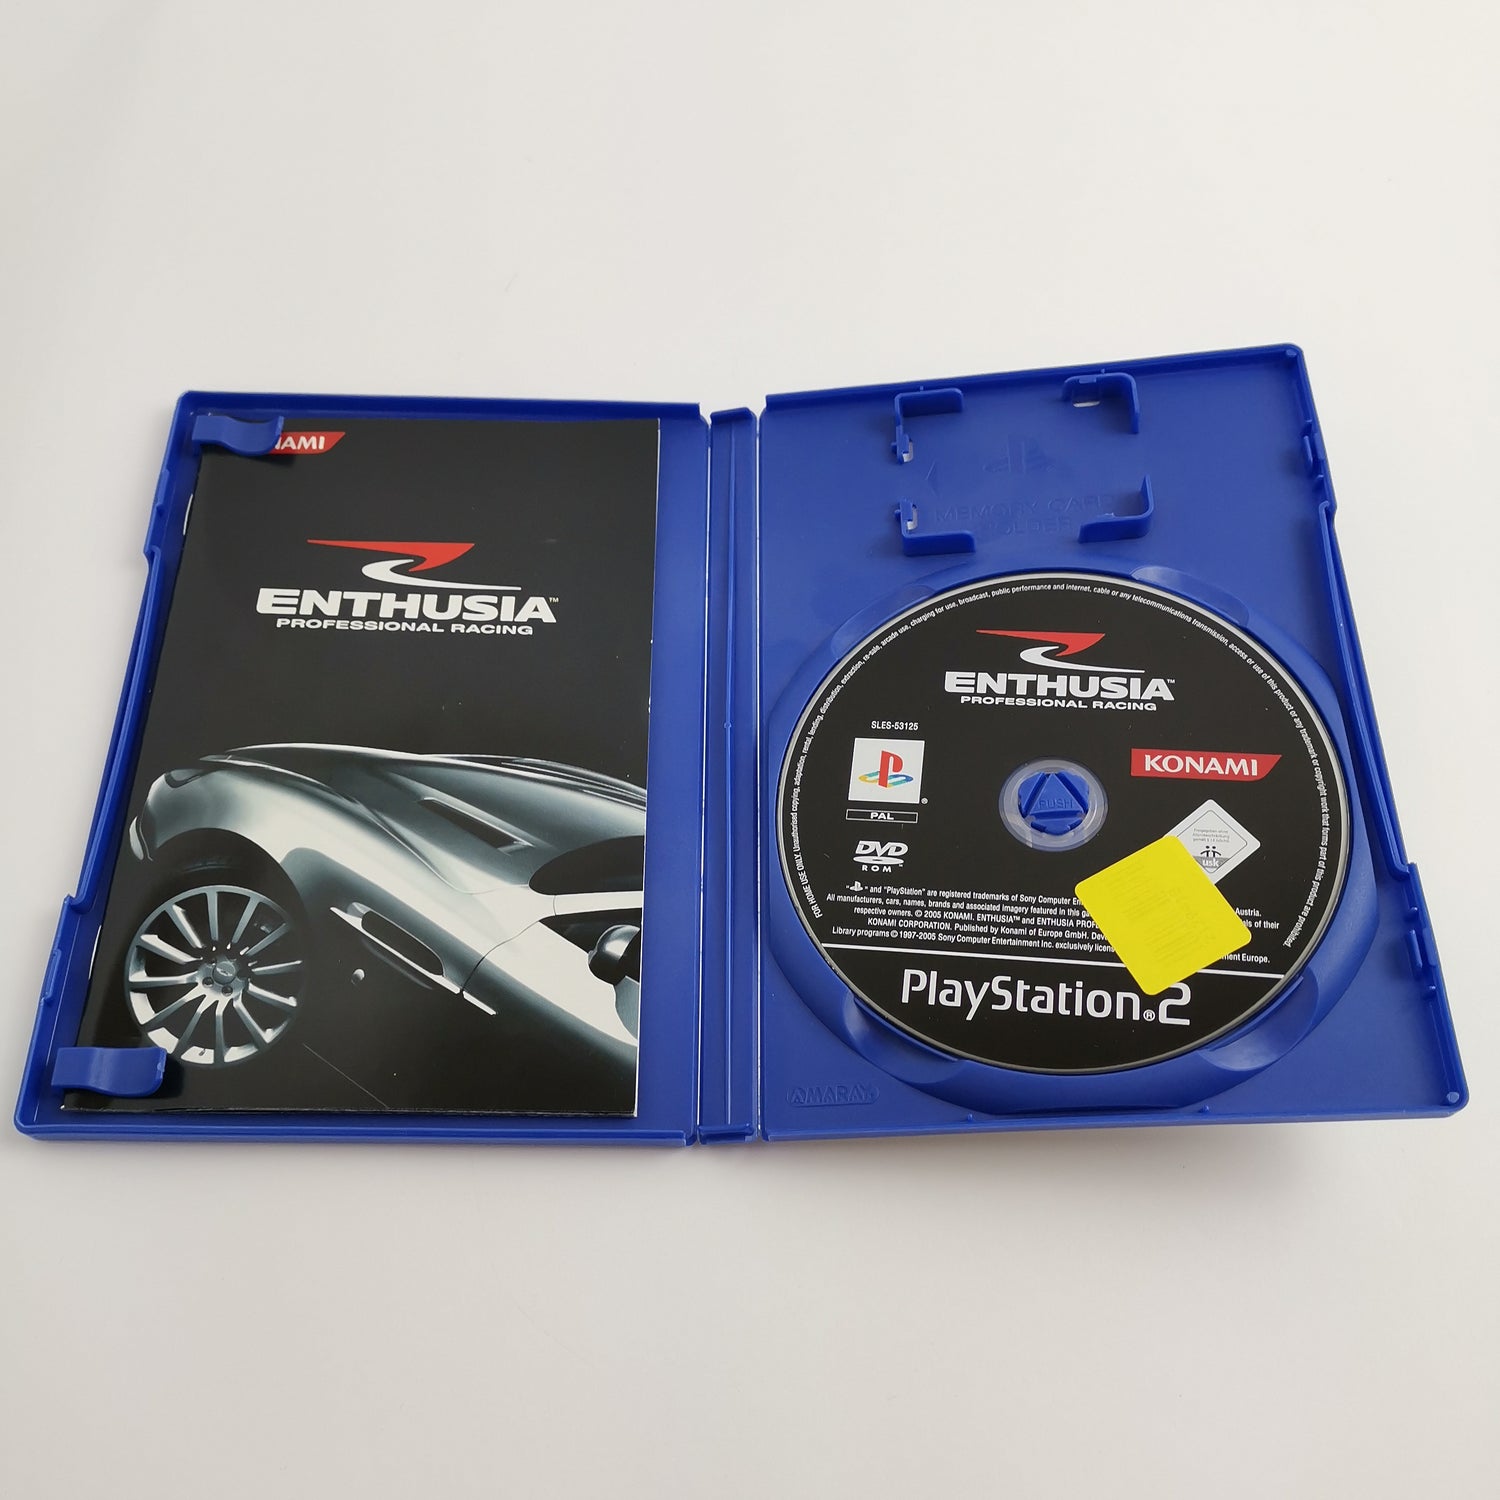 Sony Playstation 2 Game: Enthusia Professional Racing | PS2 - original packaging